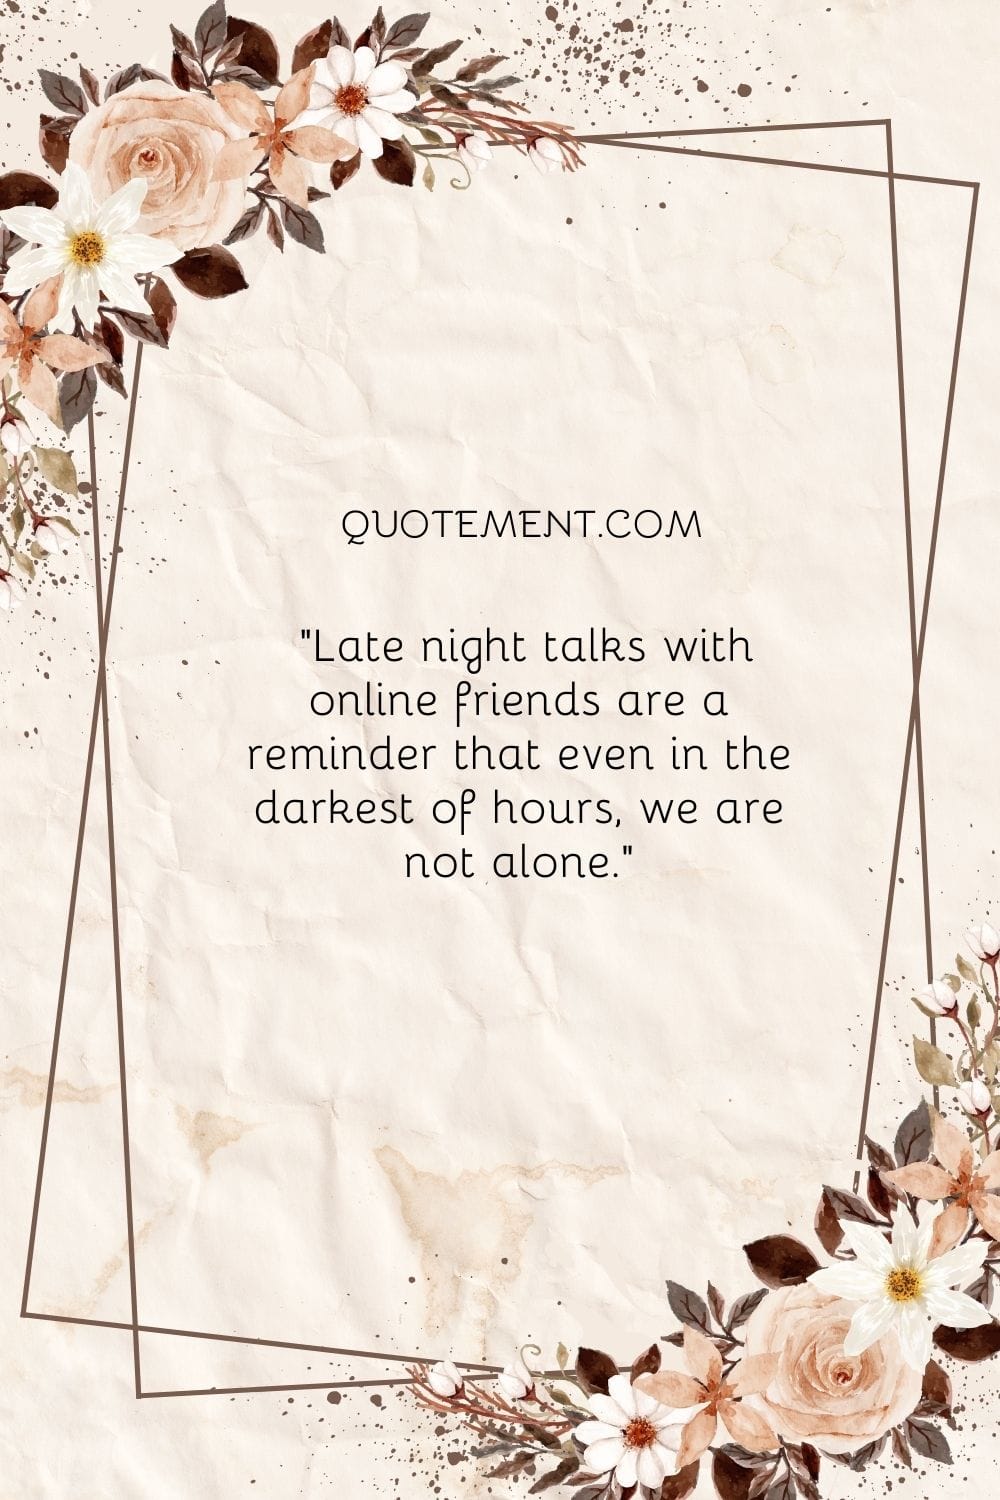 Late night talks with online friends are a reminder that even in the darkest of hours, we are not alone